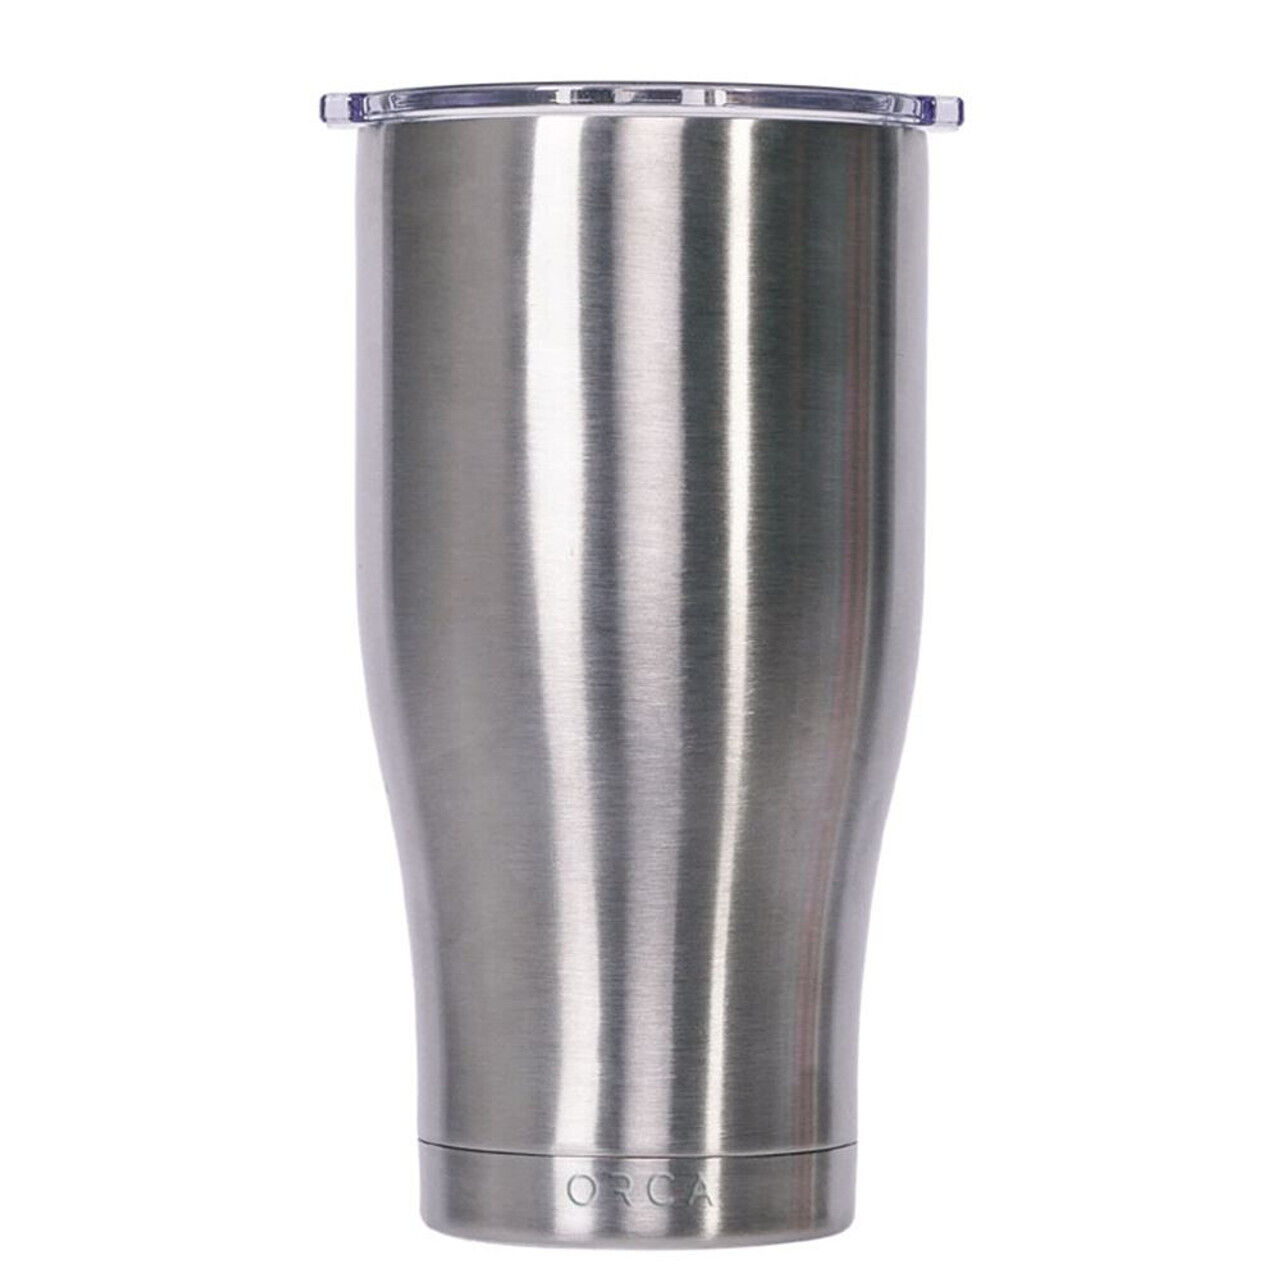 NEW ORCA Chaser 27 oz Stainless 7" height ORCA Does not apply